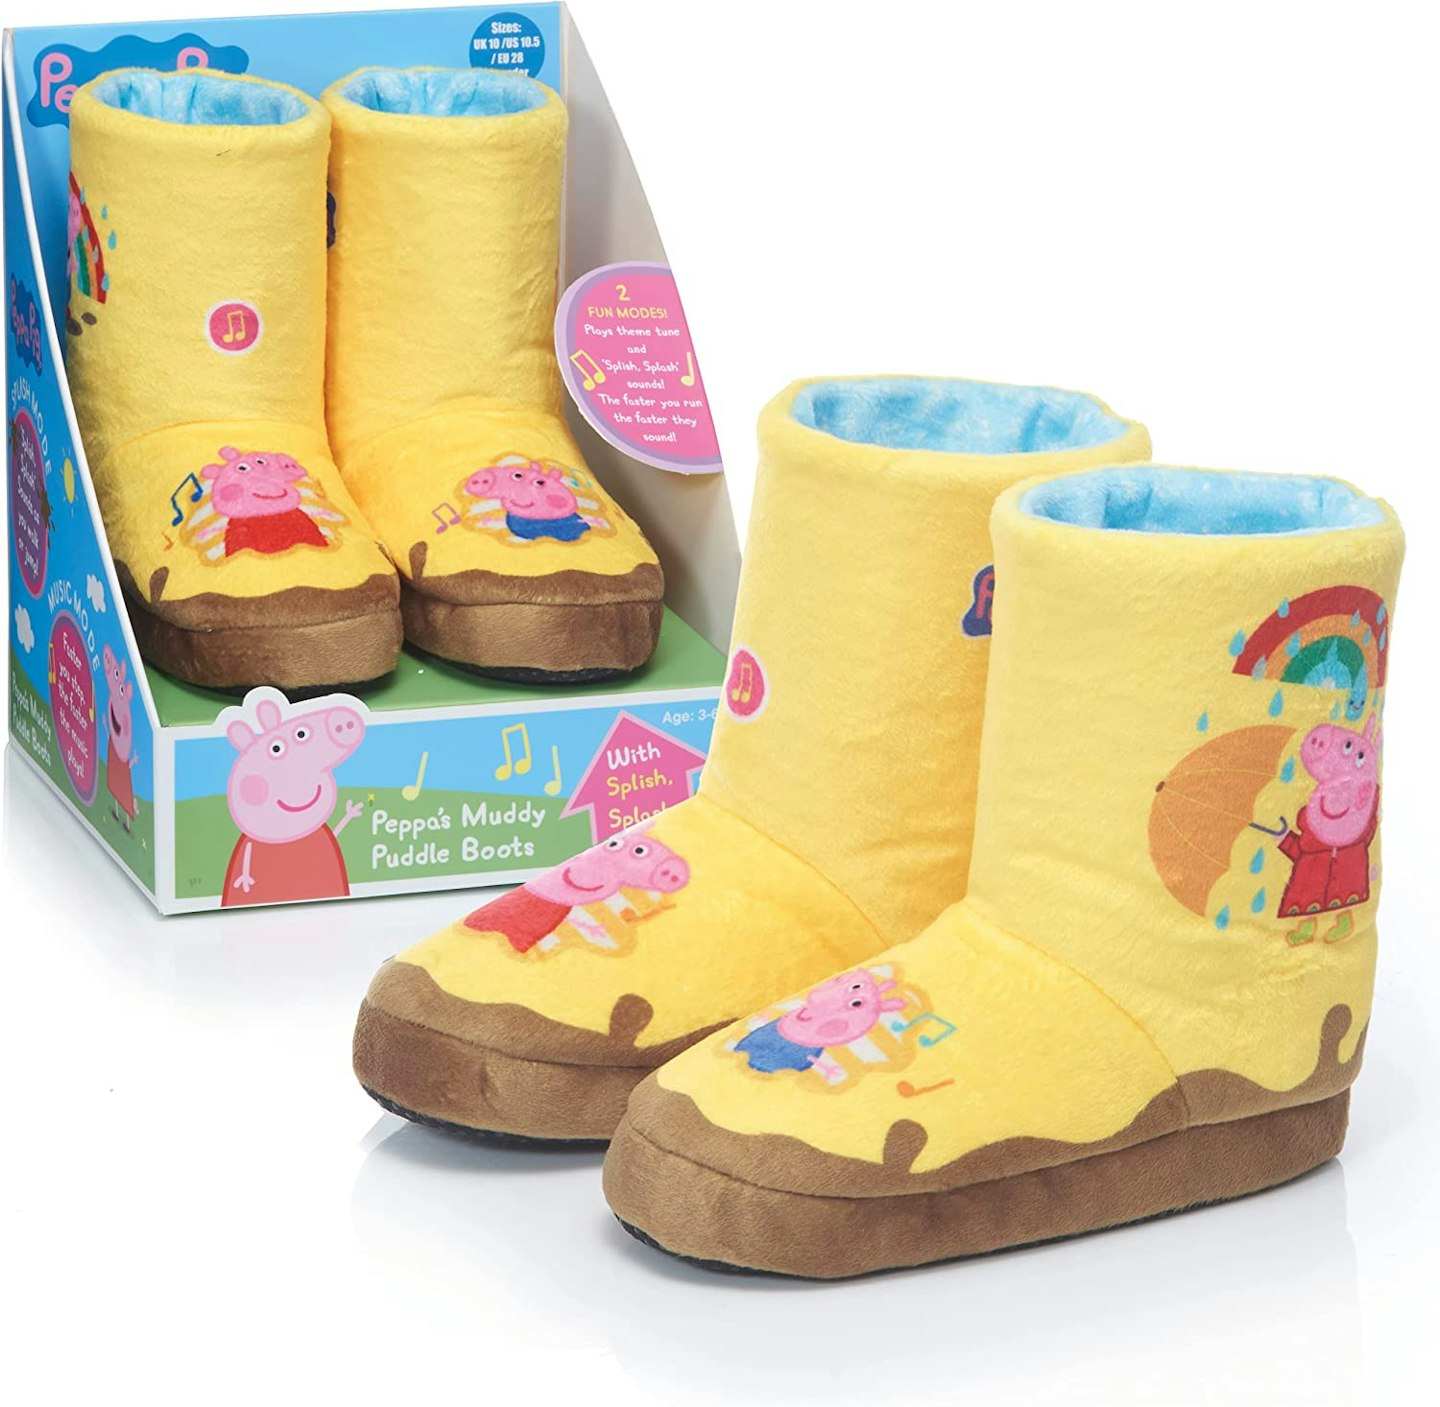 Peppa Pig Toys Muddy Puddle Boots with Sounds